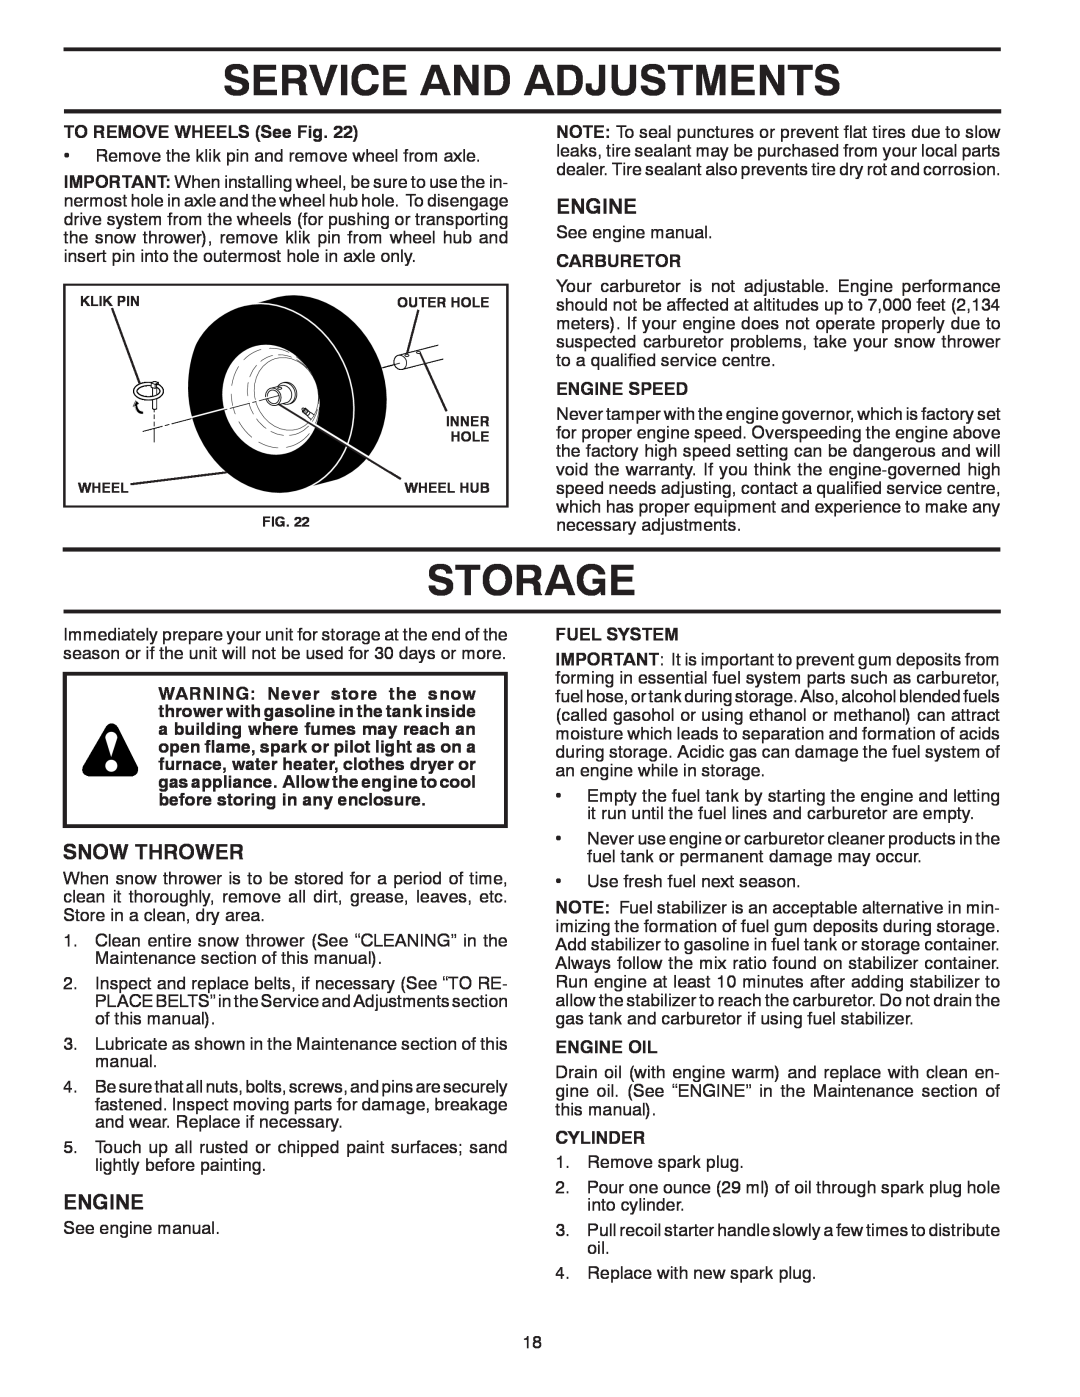 Poulan 421104 owner manual Storage, Service And Adjustments, Engine, Snow Thrower 